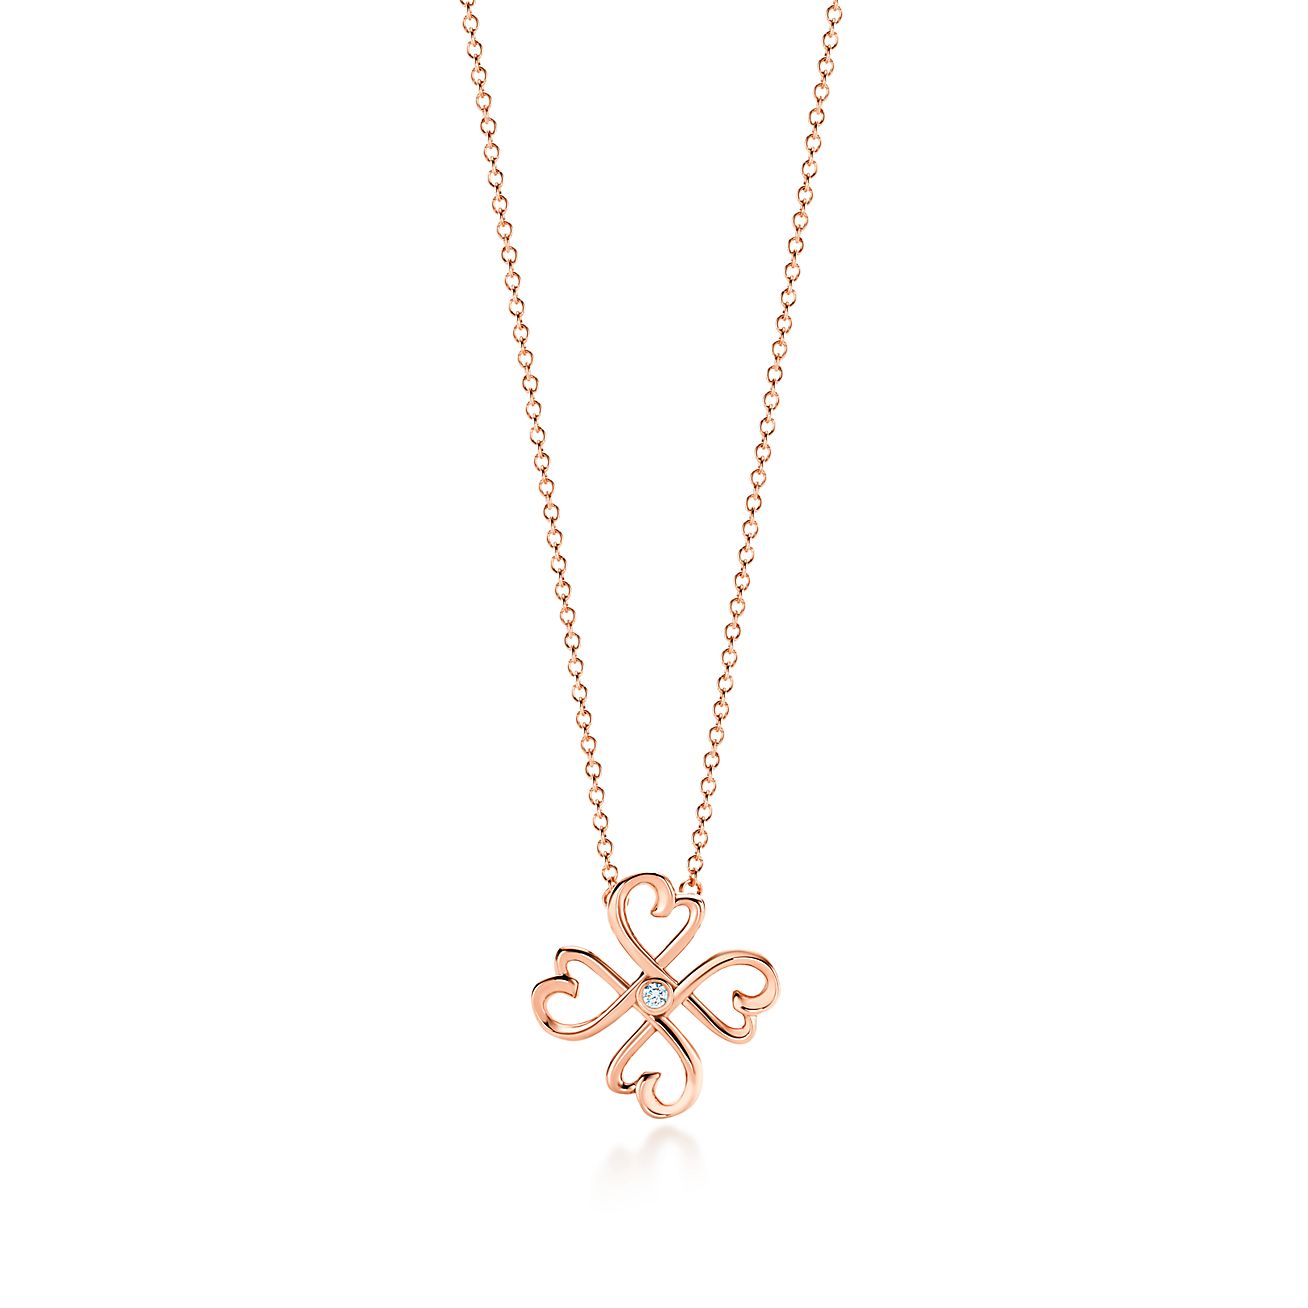 Paloma Picasso® Loving Heart pendant in 18k rose gold with a 